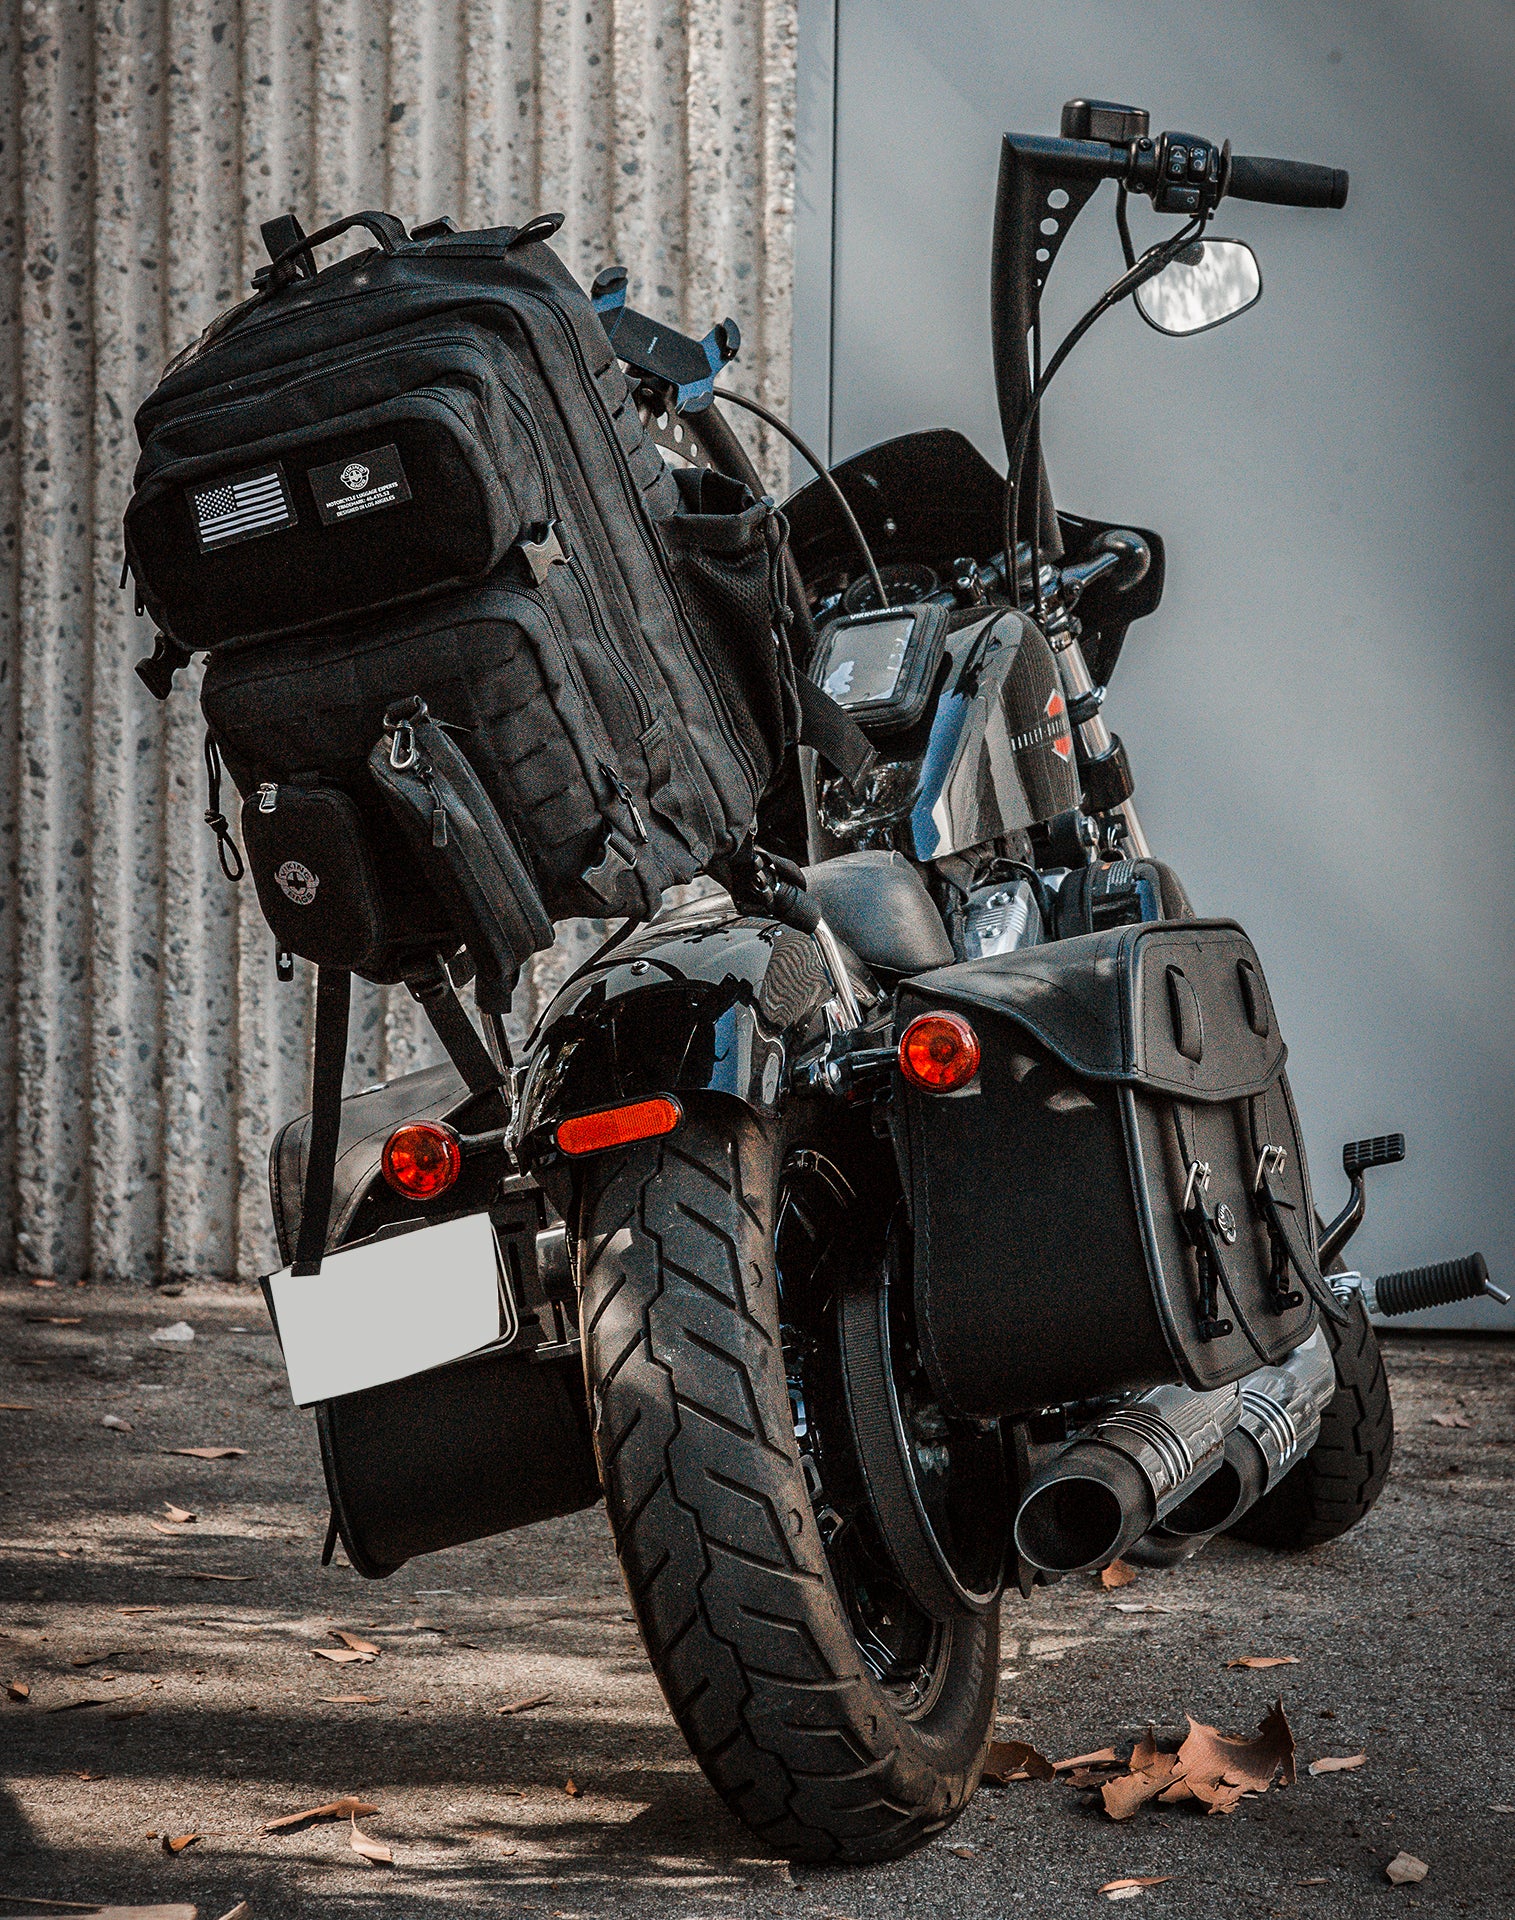 45L - Tactical XL Motorcycle Sissy Bar Backpack